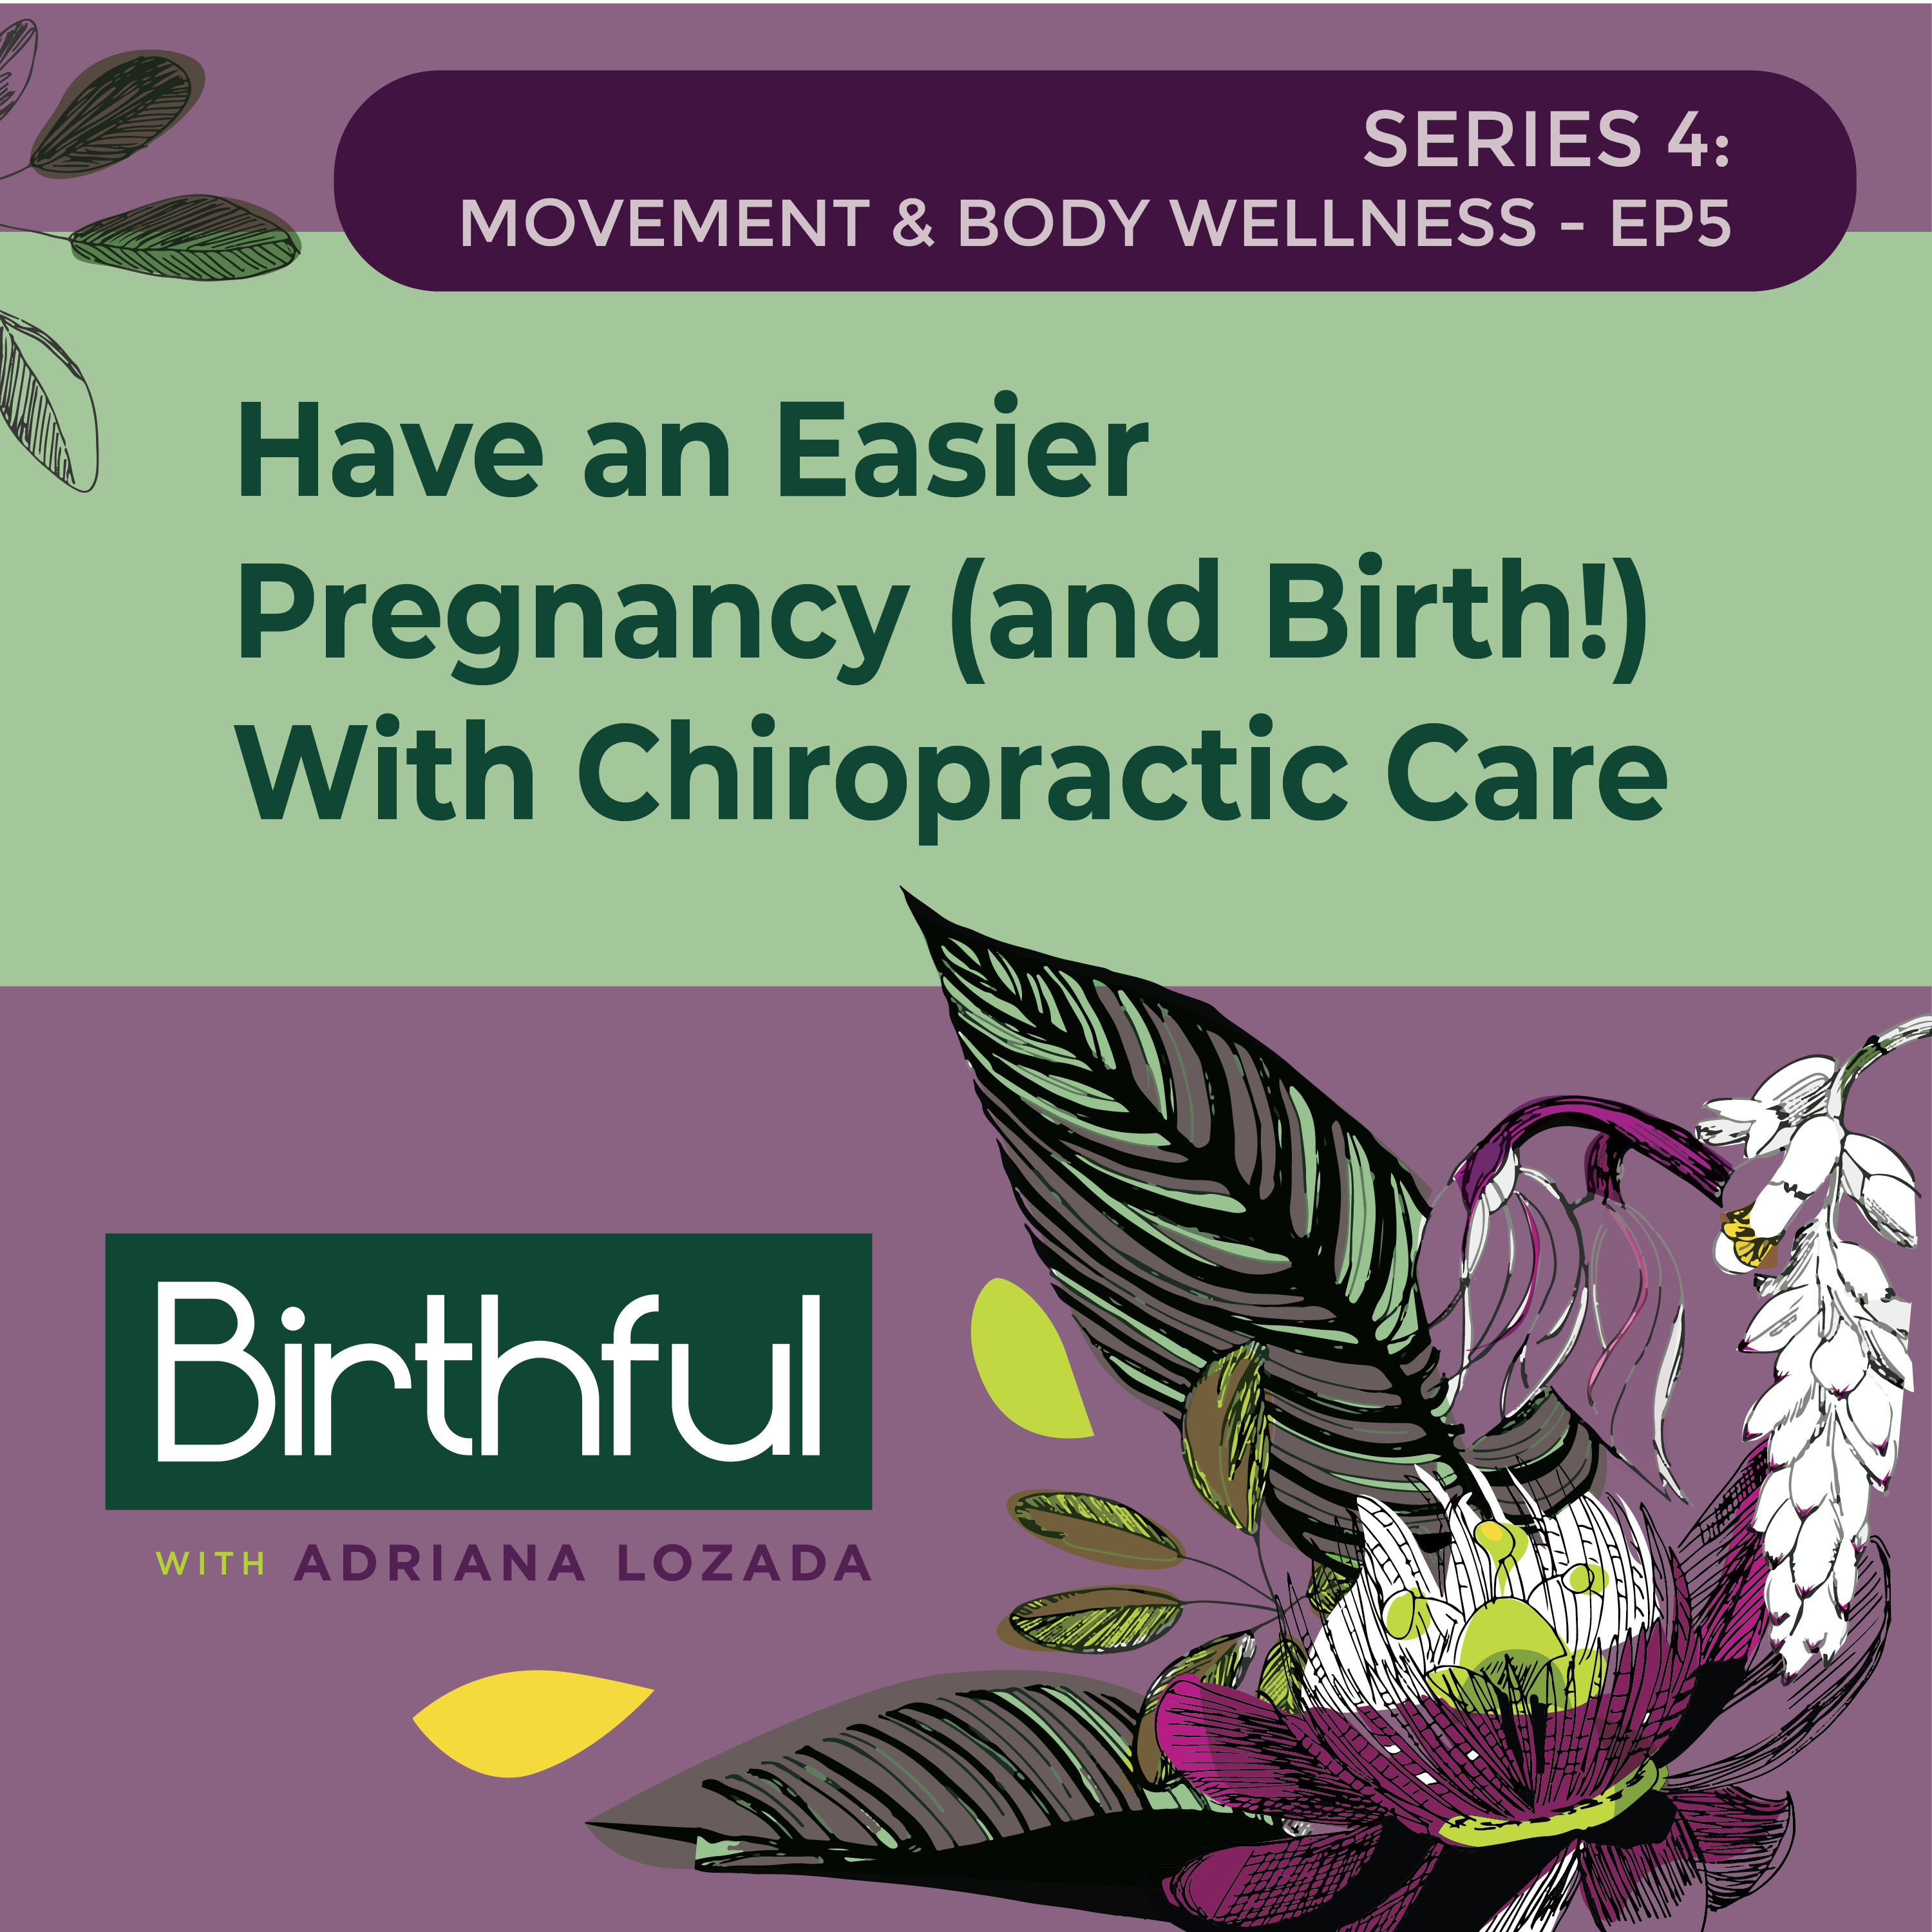 Have an Easier Pregnancy (and Birth!) With Chiropractic Care